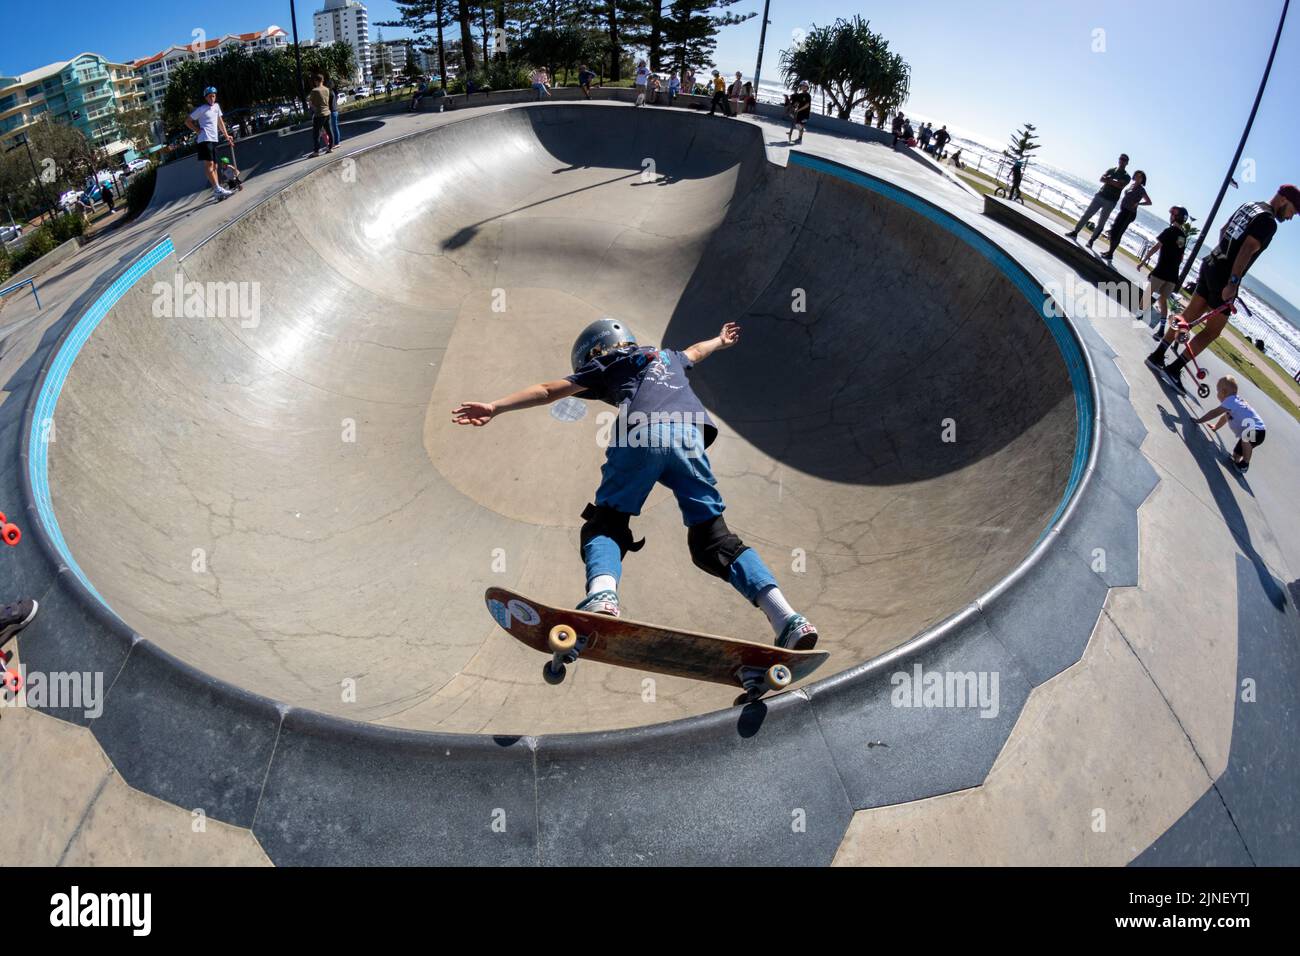 A young skater at Alexandra Headland skate park in Queensland, Australia Stock Photo